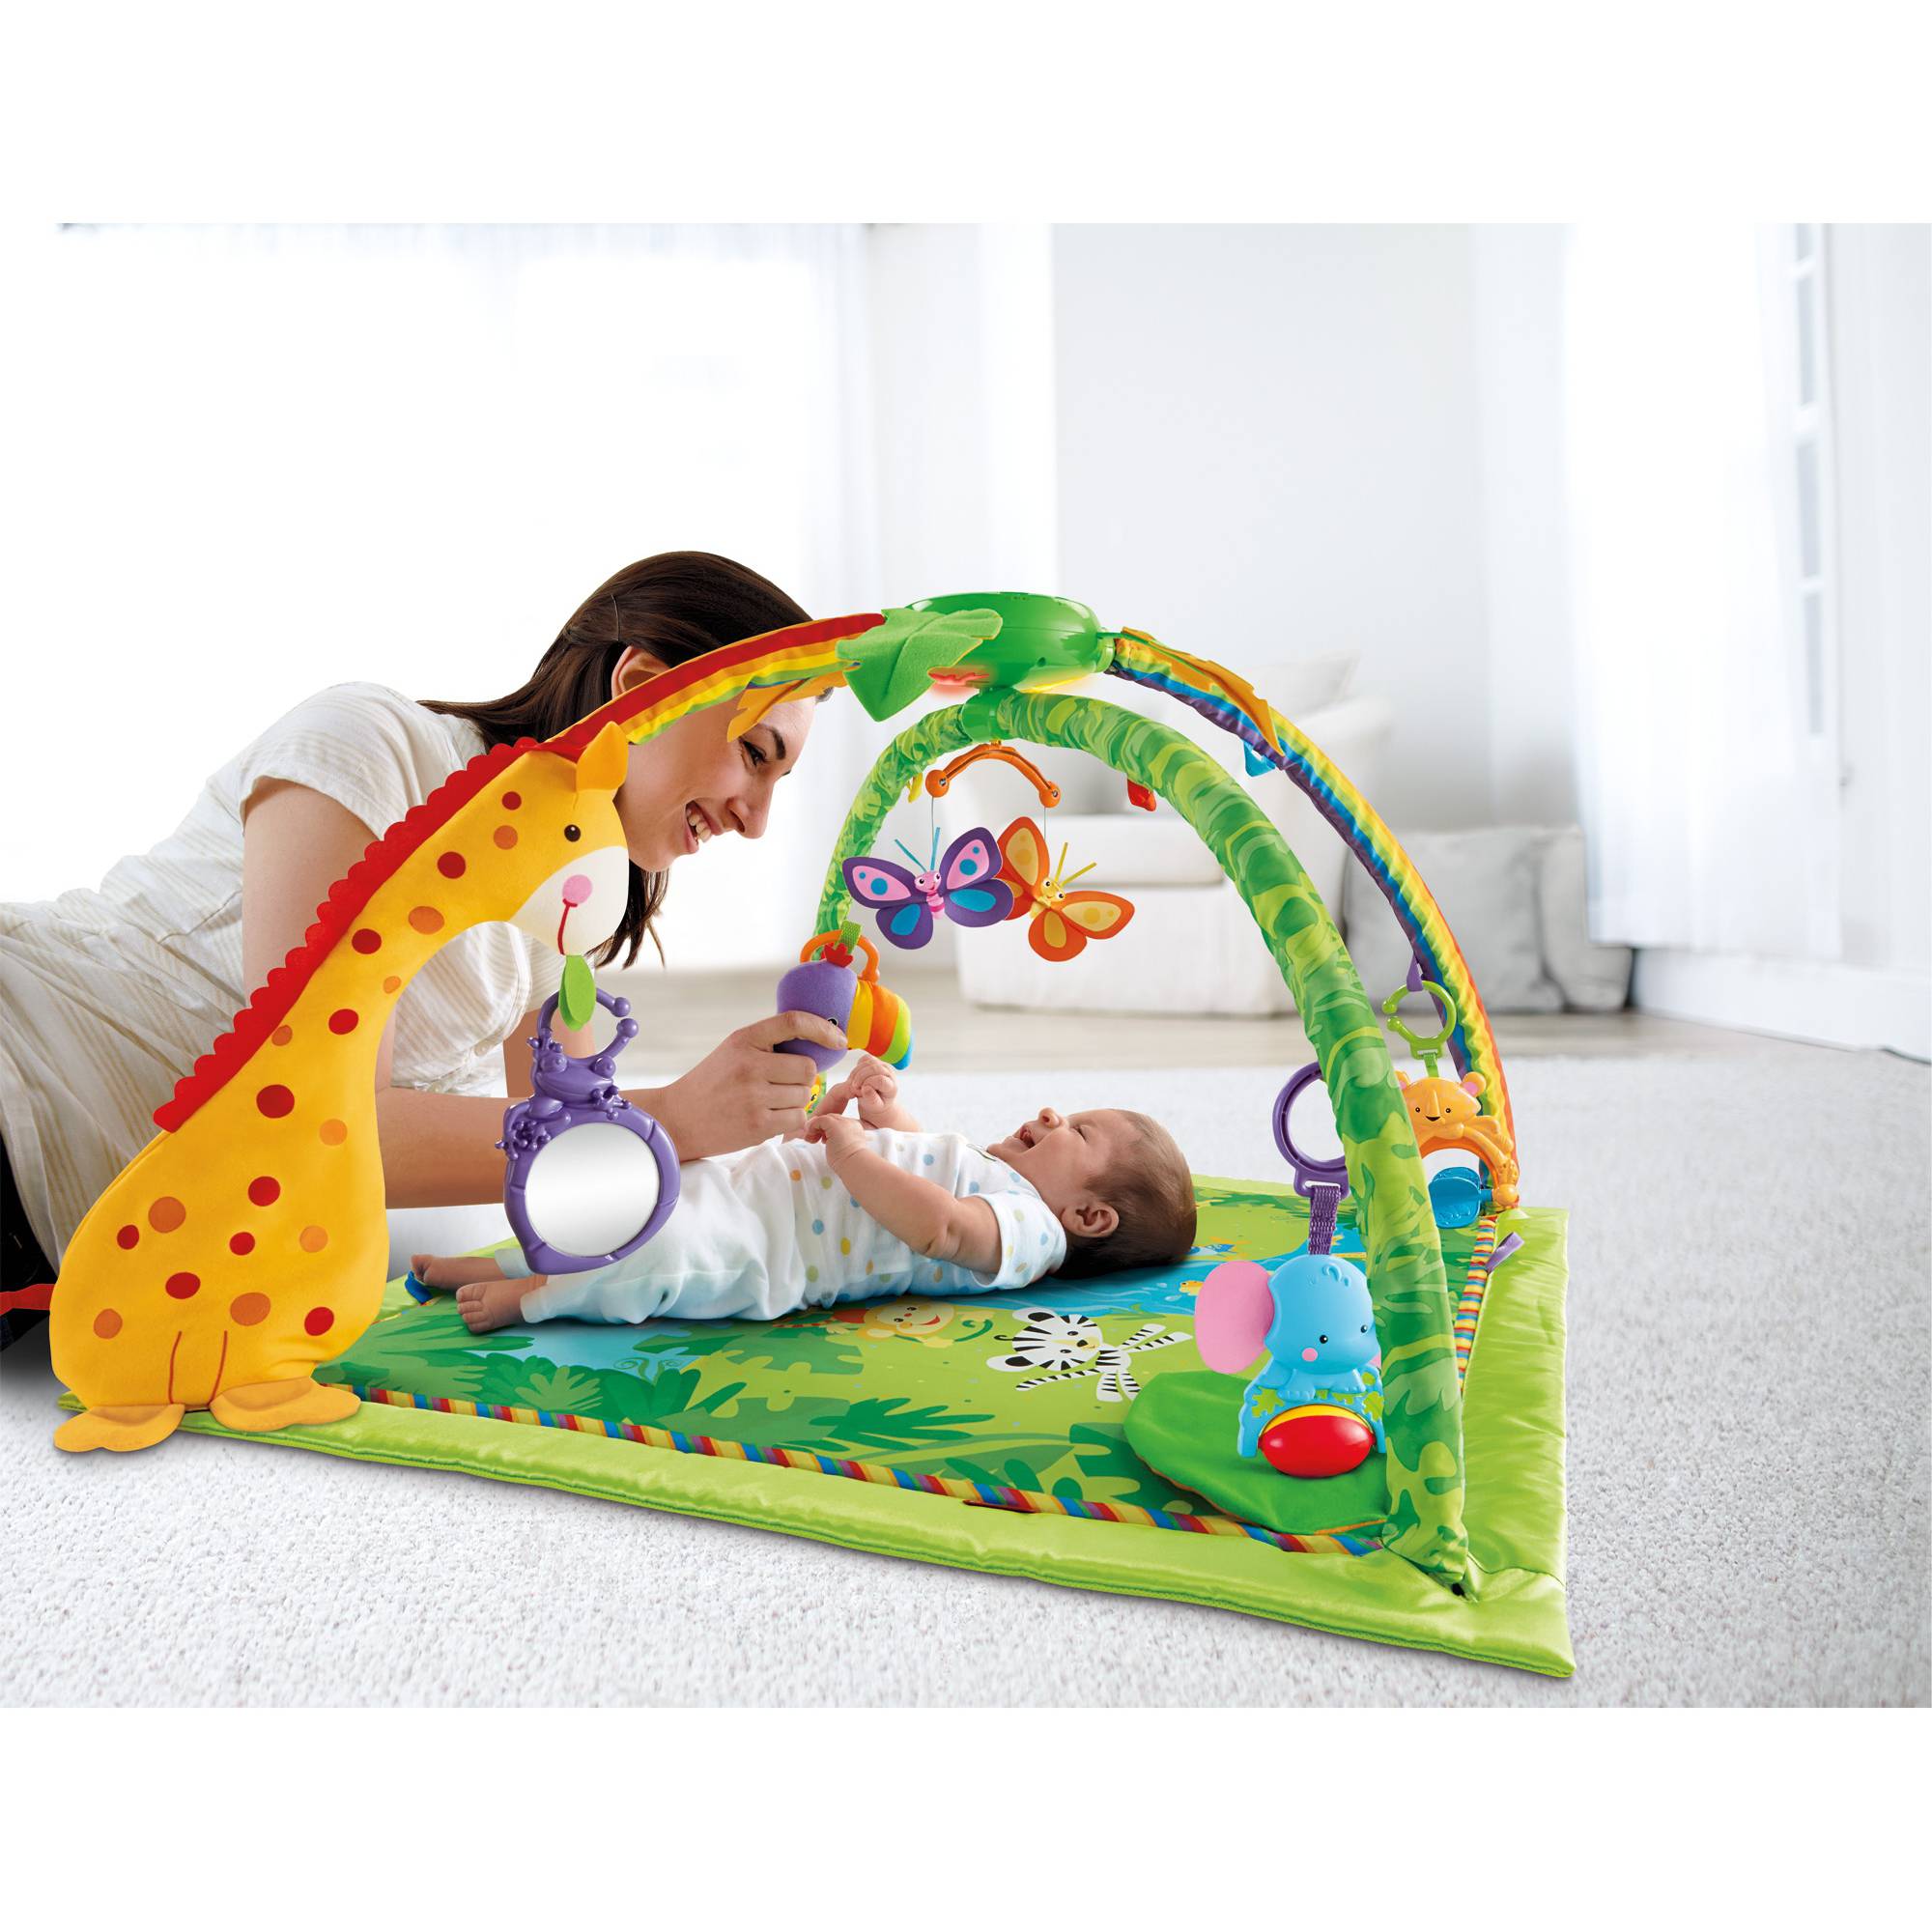 Fisher-Price Rainforest Melodies & Lights Deluxe Play Gym - image 4 of 9